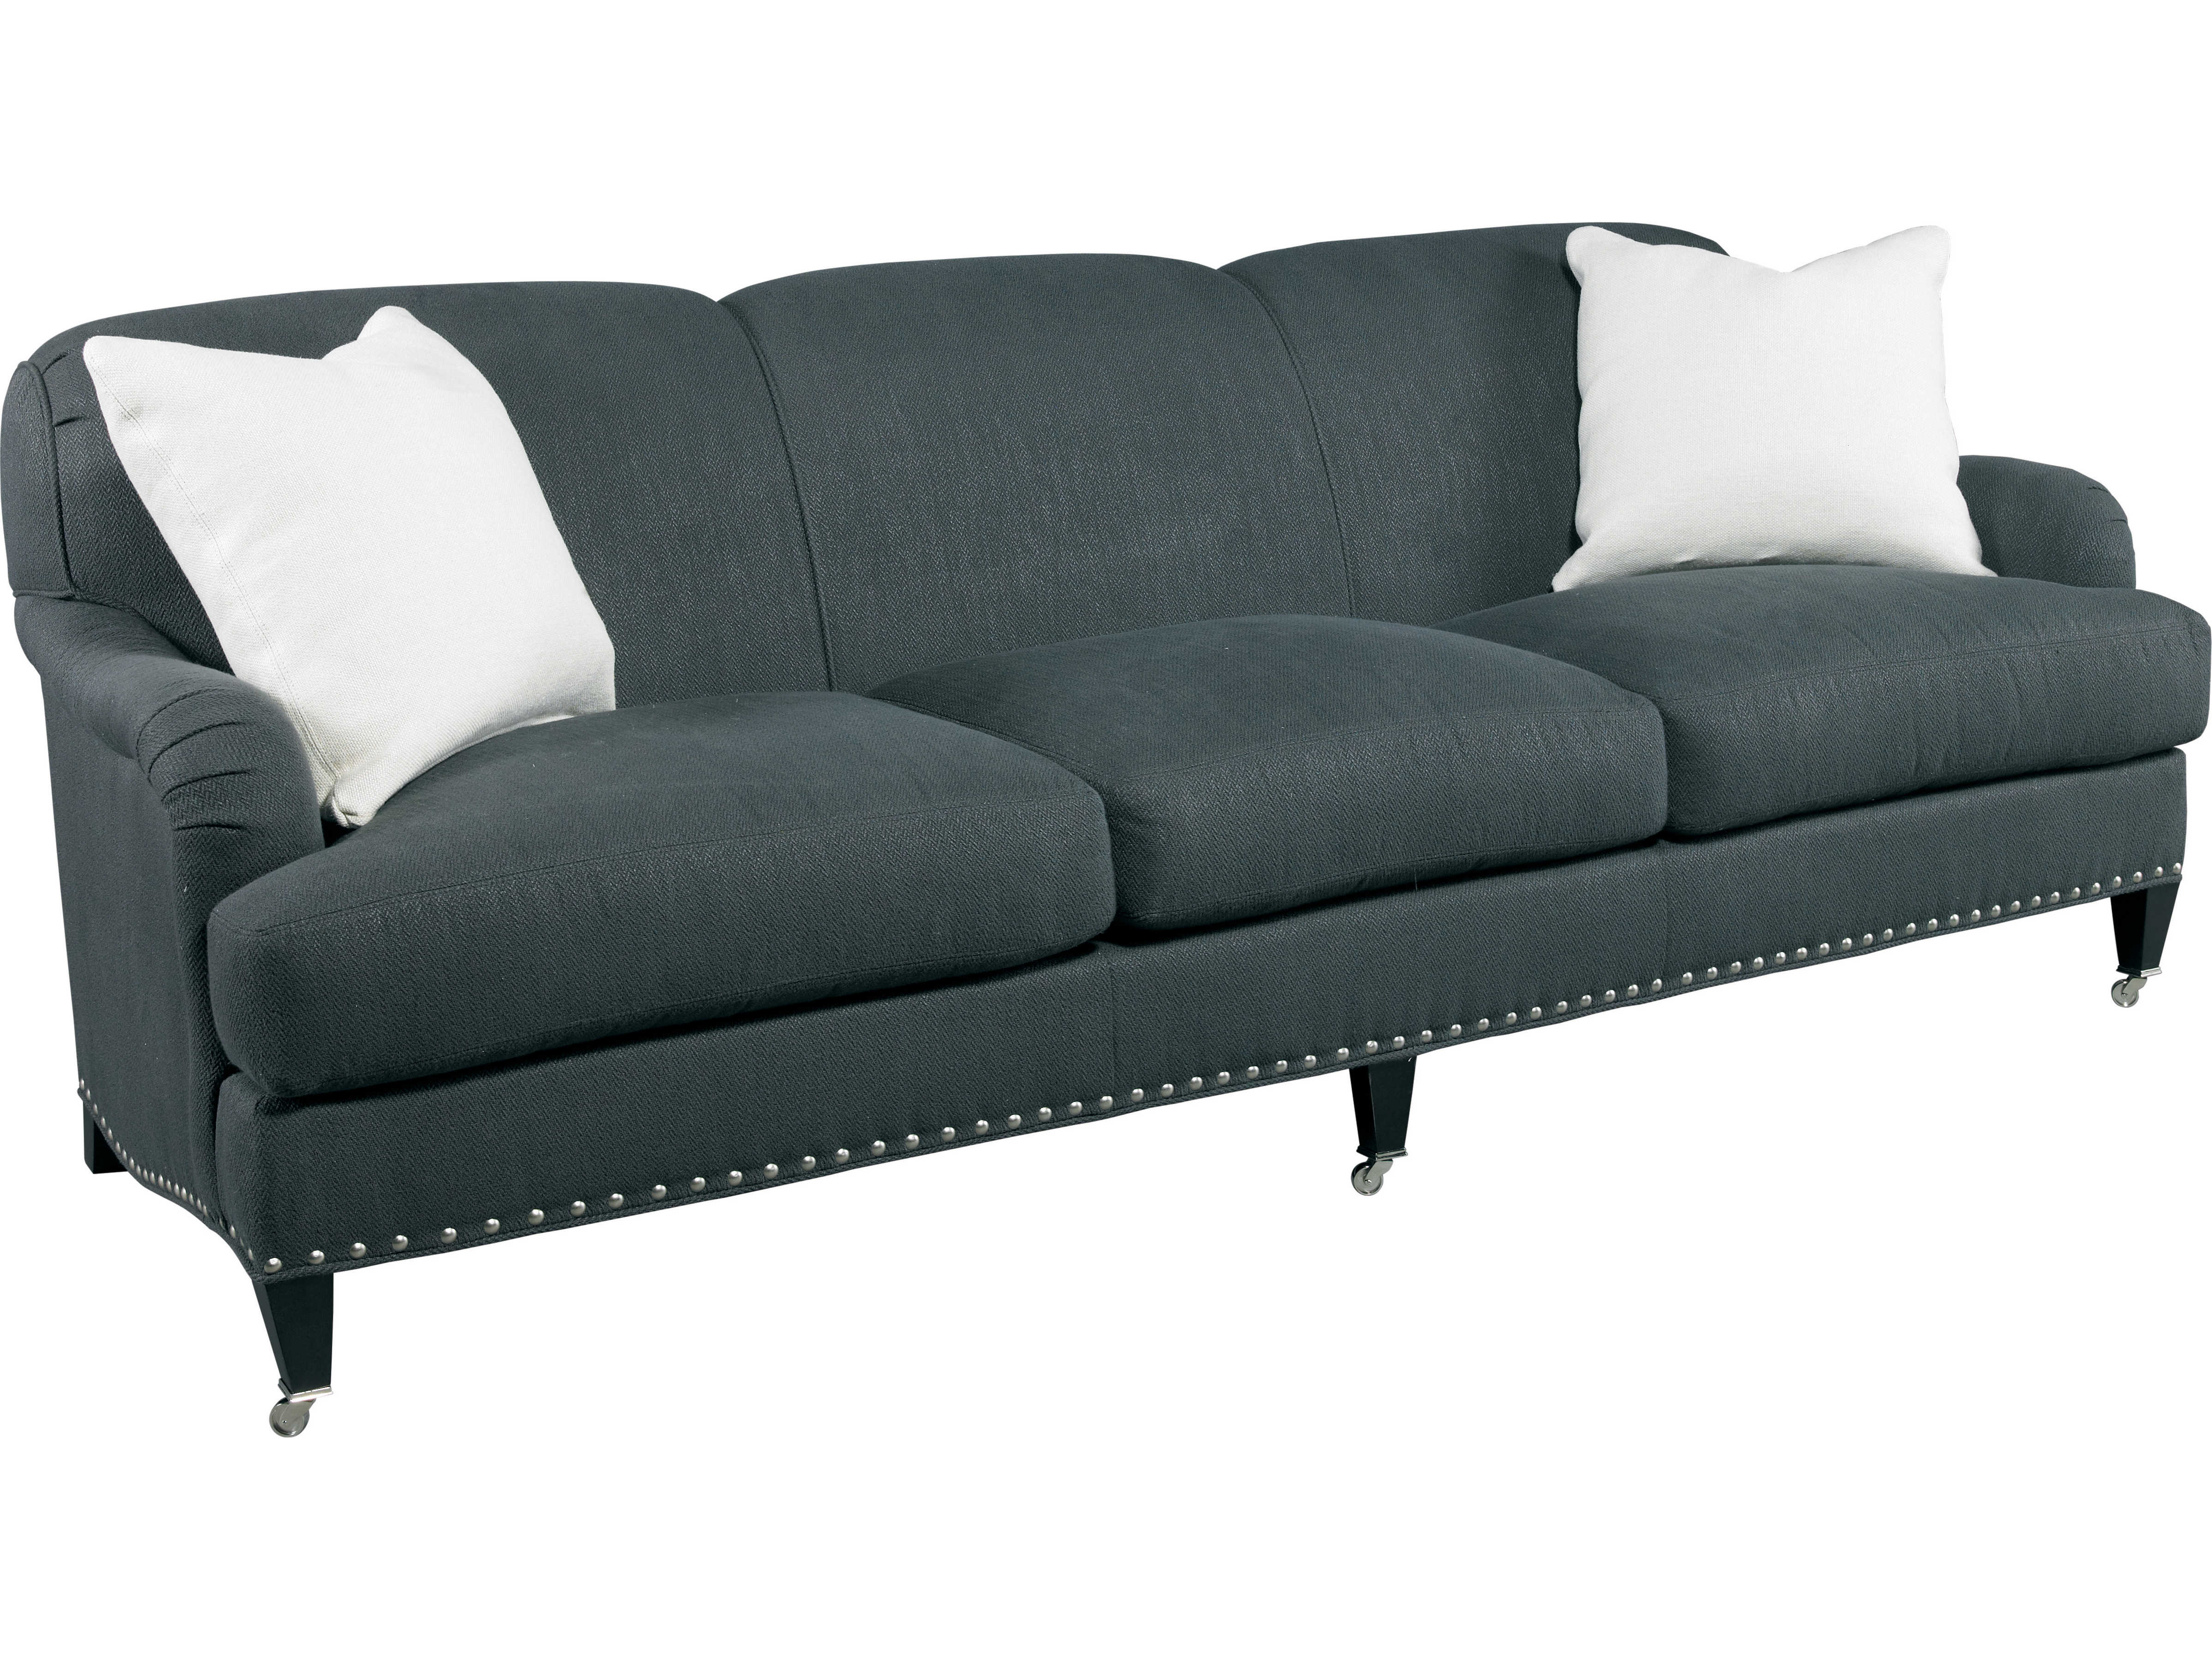 Lillian August Upholstery Sofa Couch lnaLA7128M